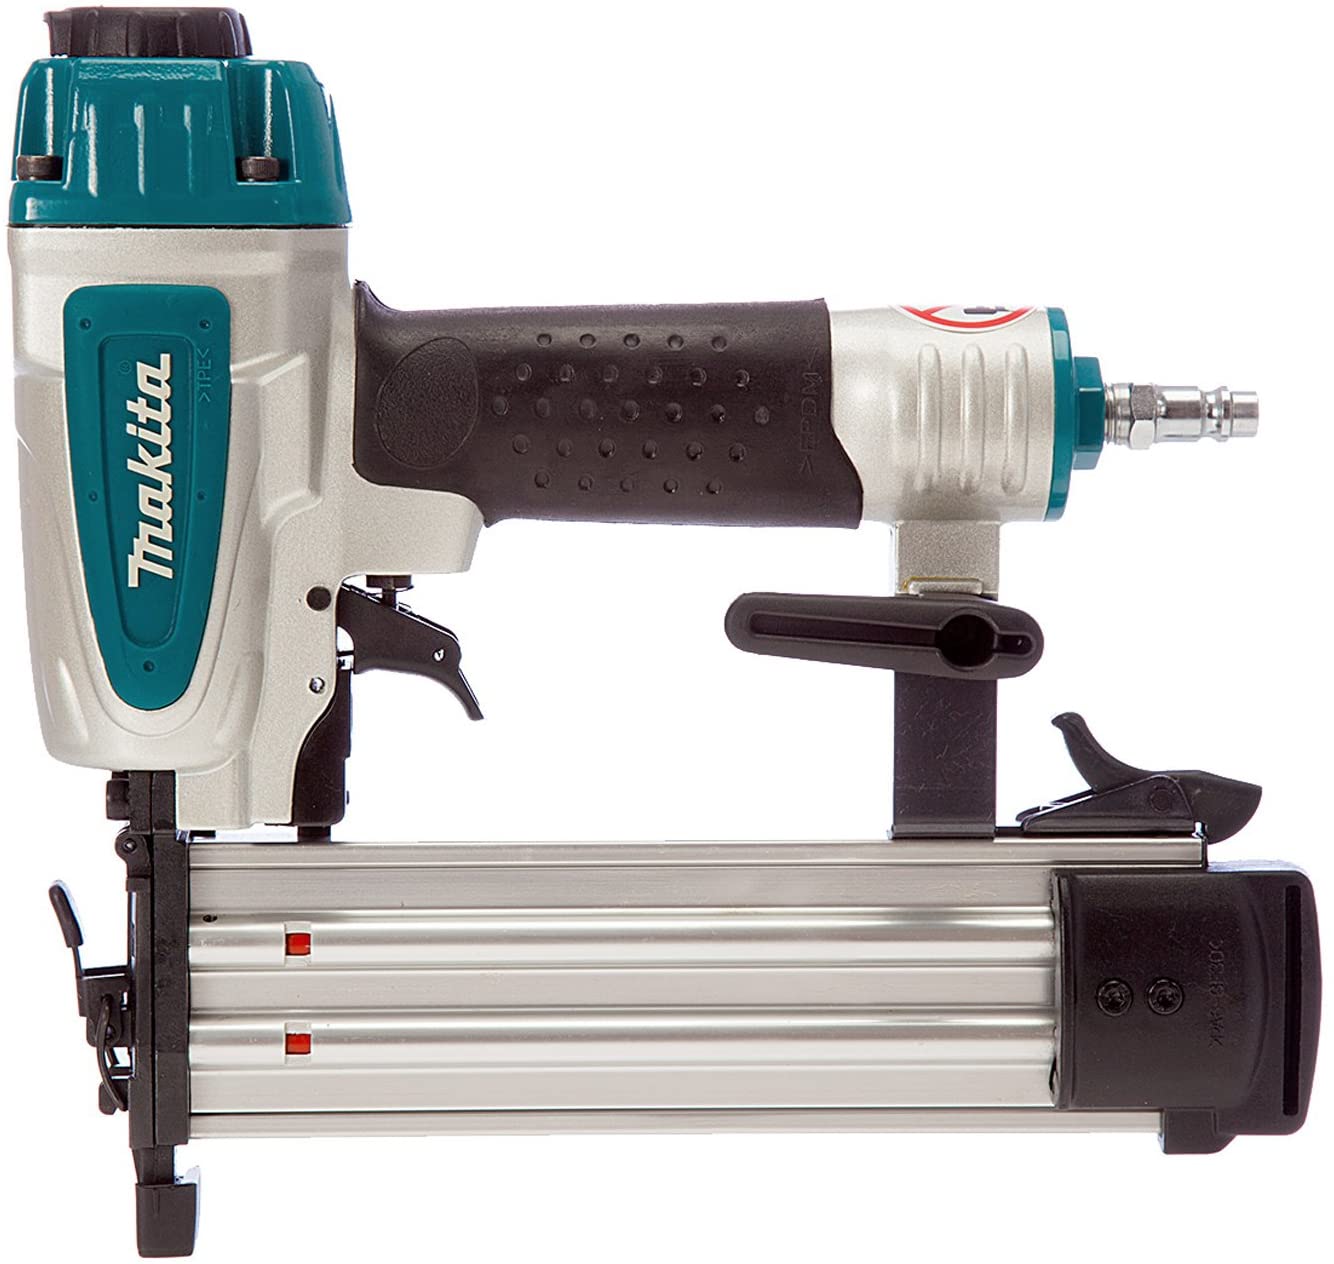 Makita 2-Inch Nailer (Discontinued by Manufacturer) | Innovative Technical Supplies